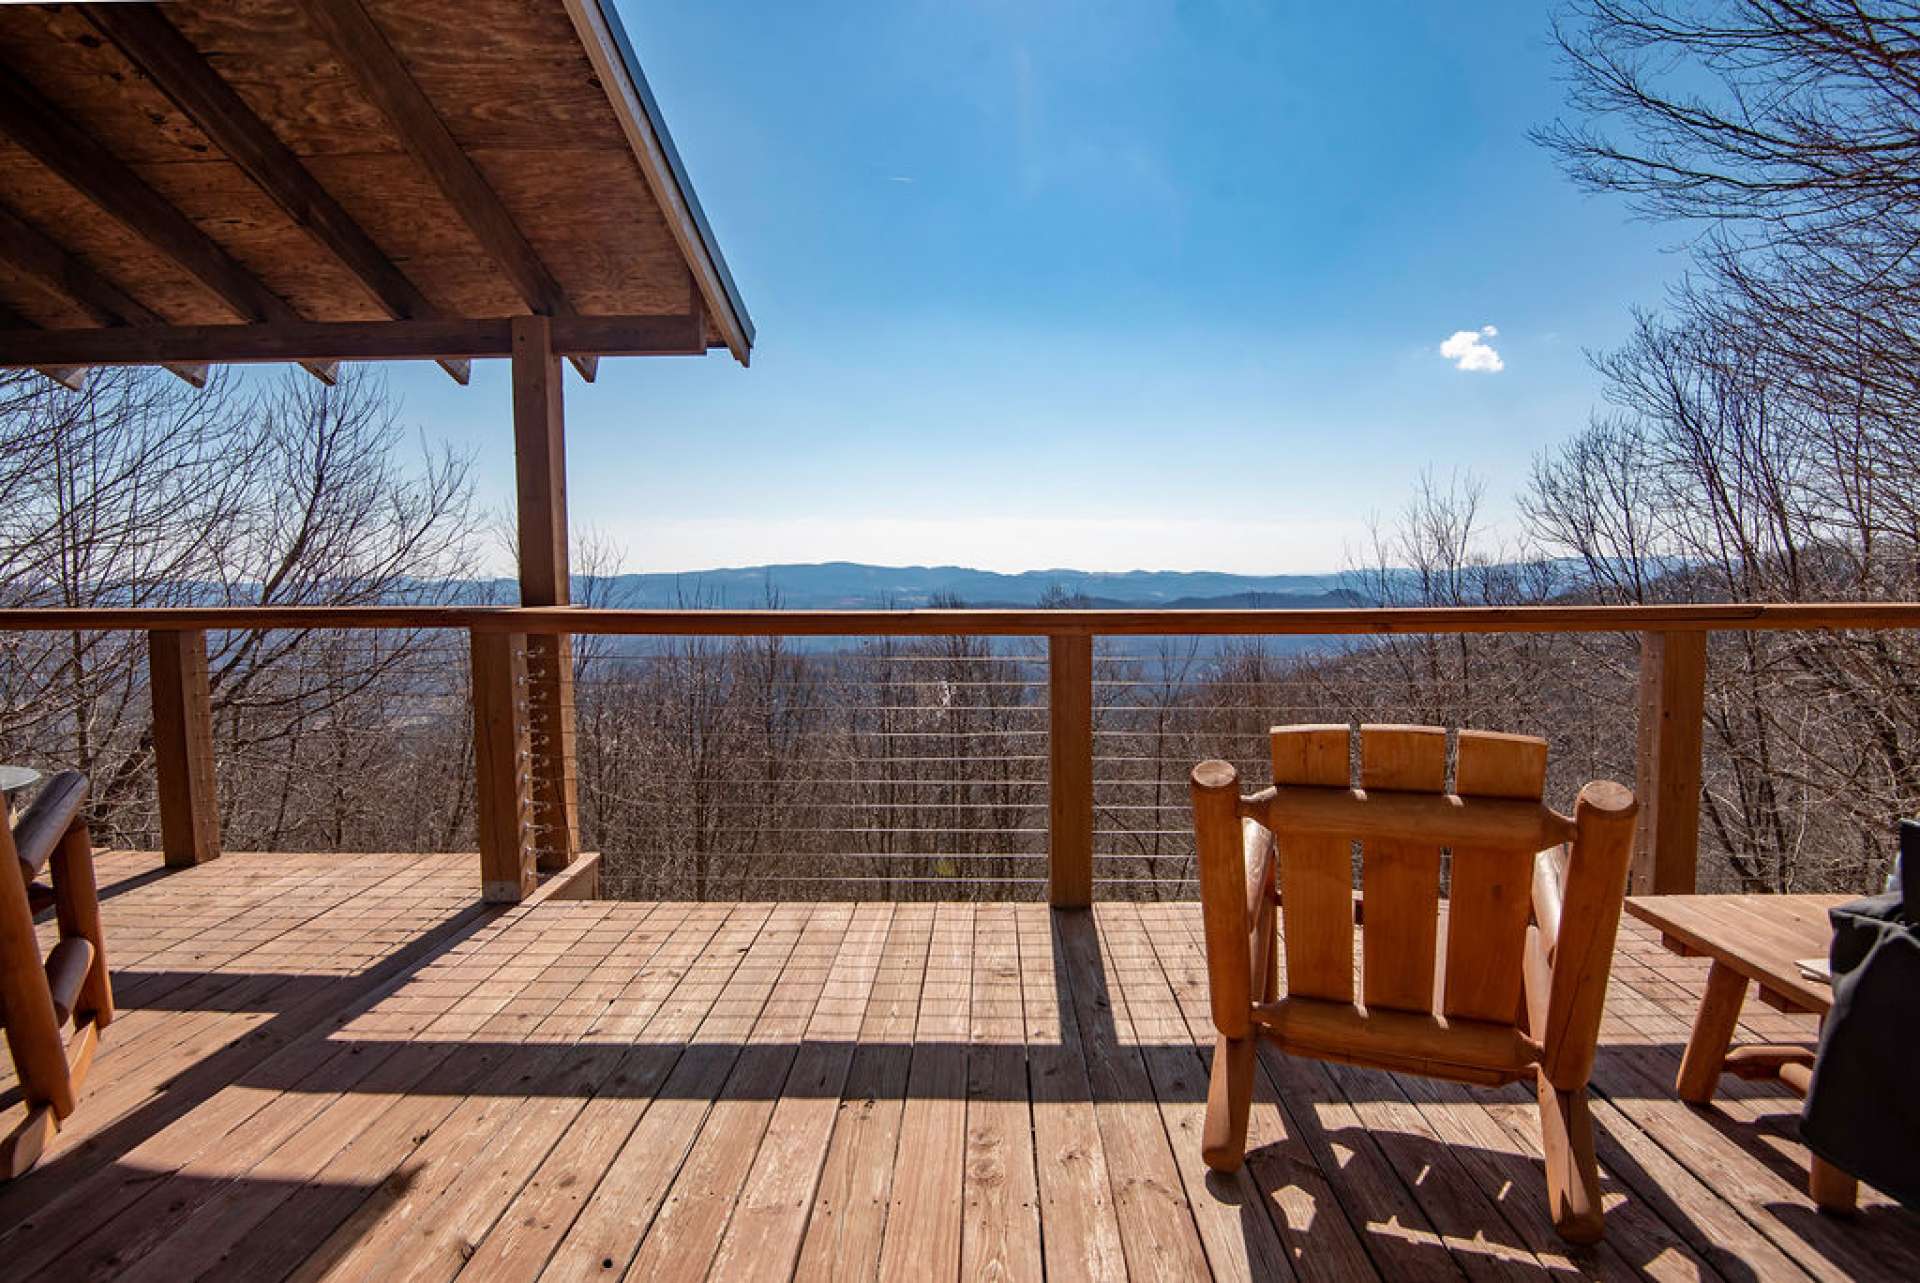 Enjoy your favorite beverage and meal on the deck while admiring the unobstructed mountain vistas.